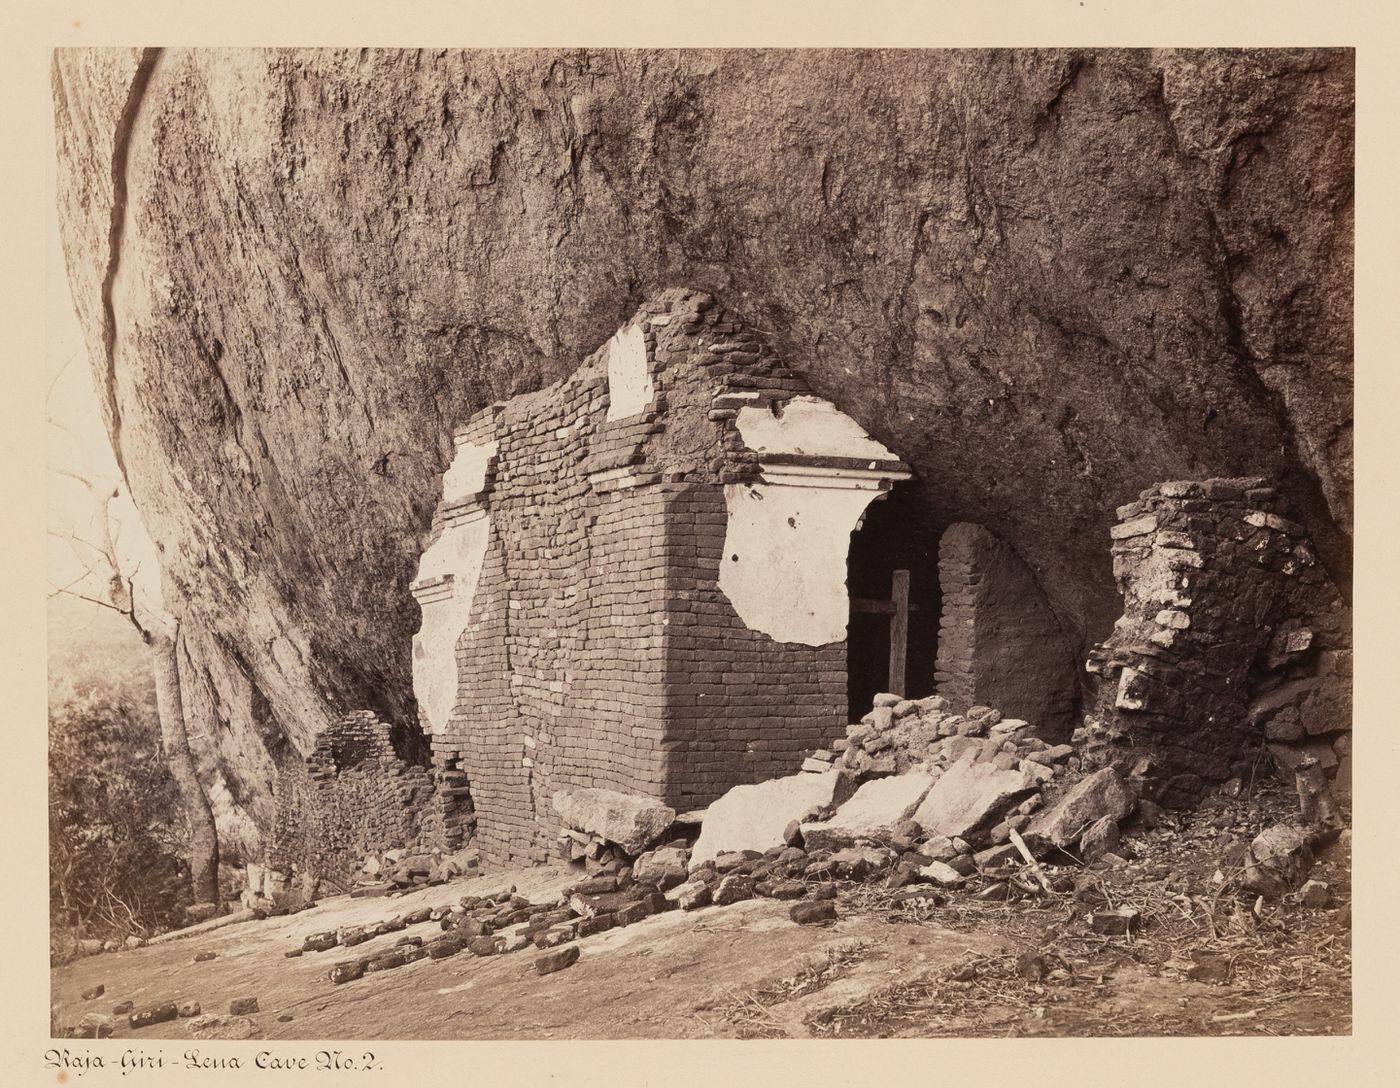 View of the ruins of a brick building, possibly known as Cave No. 2, Raja-Giri-Lena (also known as Raja-Giri-Lena-Kande and Care Mountain), Mihintale, Ceylon (now Sri Lanka)